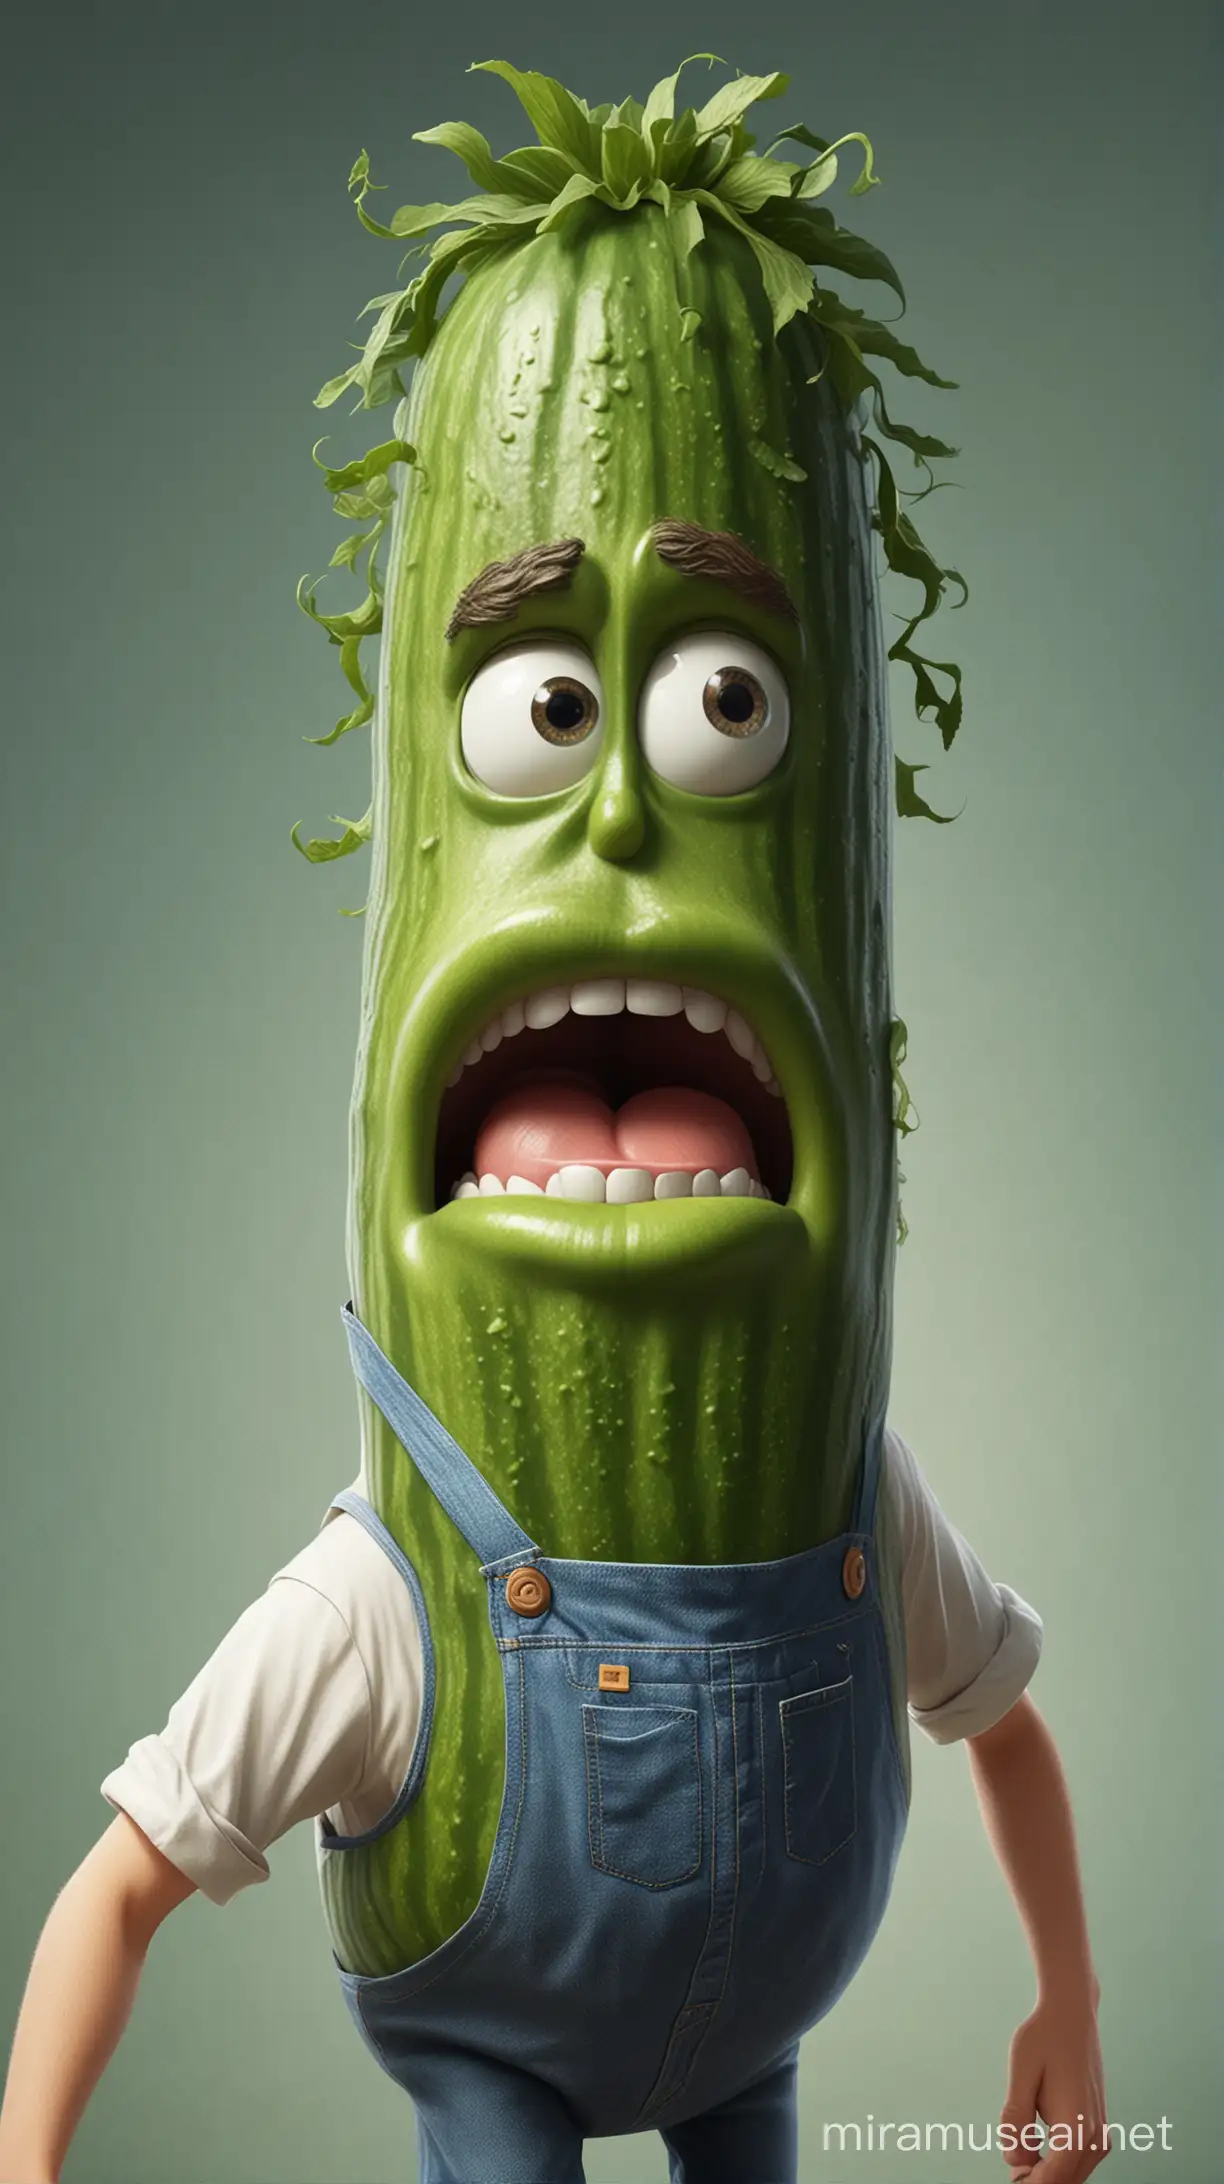 Picture a scene for a vibrant, detailed digital painting where a cartoon character, emulating a young man with a dramatic expression, is holding an oversized garden cucumber. The character has large, circular, surprised eyes and a mouth open wide in an exaggerated fashion, like a classic slapstick actor. His hair is a neat, dark shade, and he sports a styled beard and a humorous mustache. His attire consists of a white T-shirt and blue denim overalls, suggesting a down-to-earth personality or a hobbyist gardener. The cucumber is enormous, nearly the size of his torso, with a rich, verdant green hue and lighter green stripes, speckled with the characteristic bumps of a freshly picked vegetable. The background should depict a modern kitchen setting, softly out of focus, to enhance the central figure's presence. The lighting is natural and bright, casting subtle highlights on the cucumber's waxy surface. The artwork should capture a sense of wonder and whimsy, as though the character is in a lighthearted moment of shock from harvesting such a large vegetable. The overall composition should be playful, inviting a sense of joy and surprise.